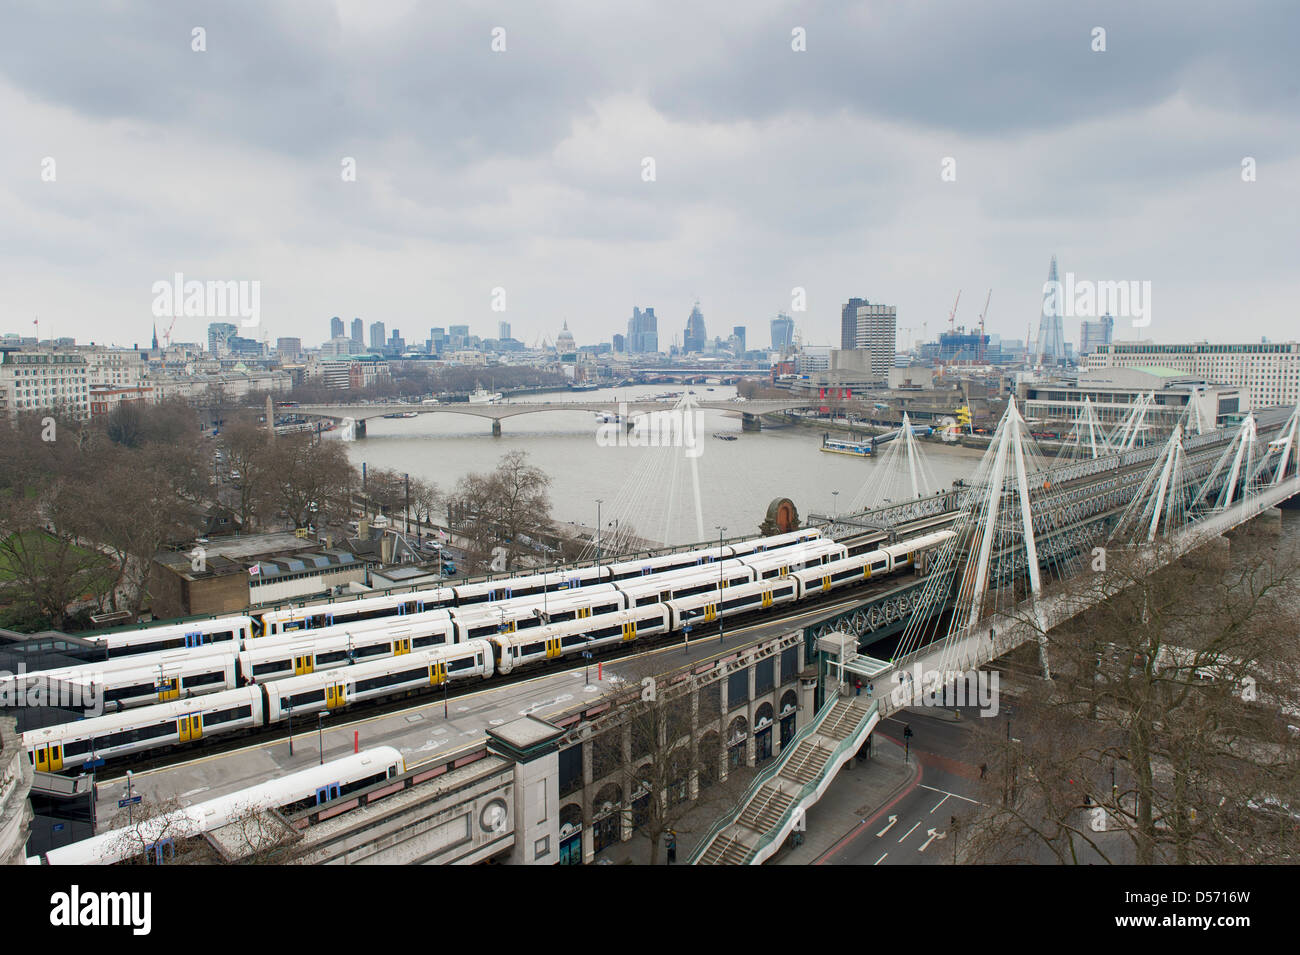 View across Charing Cross station, looking towards the City and across the River Thames. Stock Photo